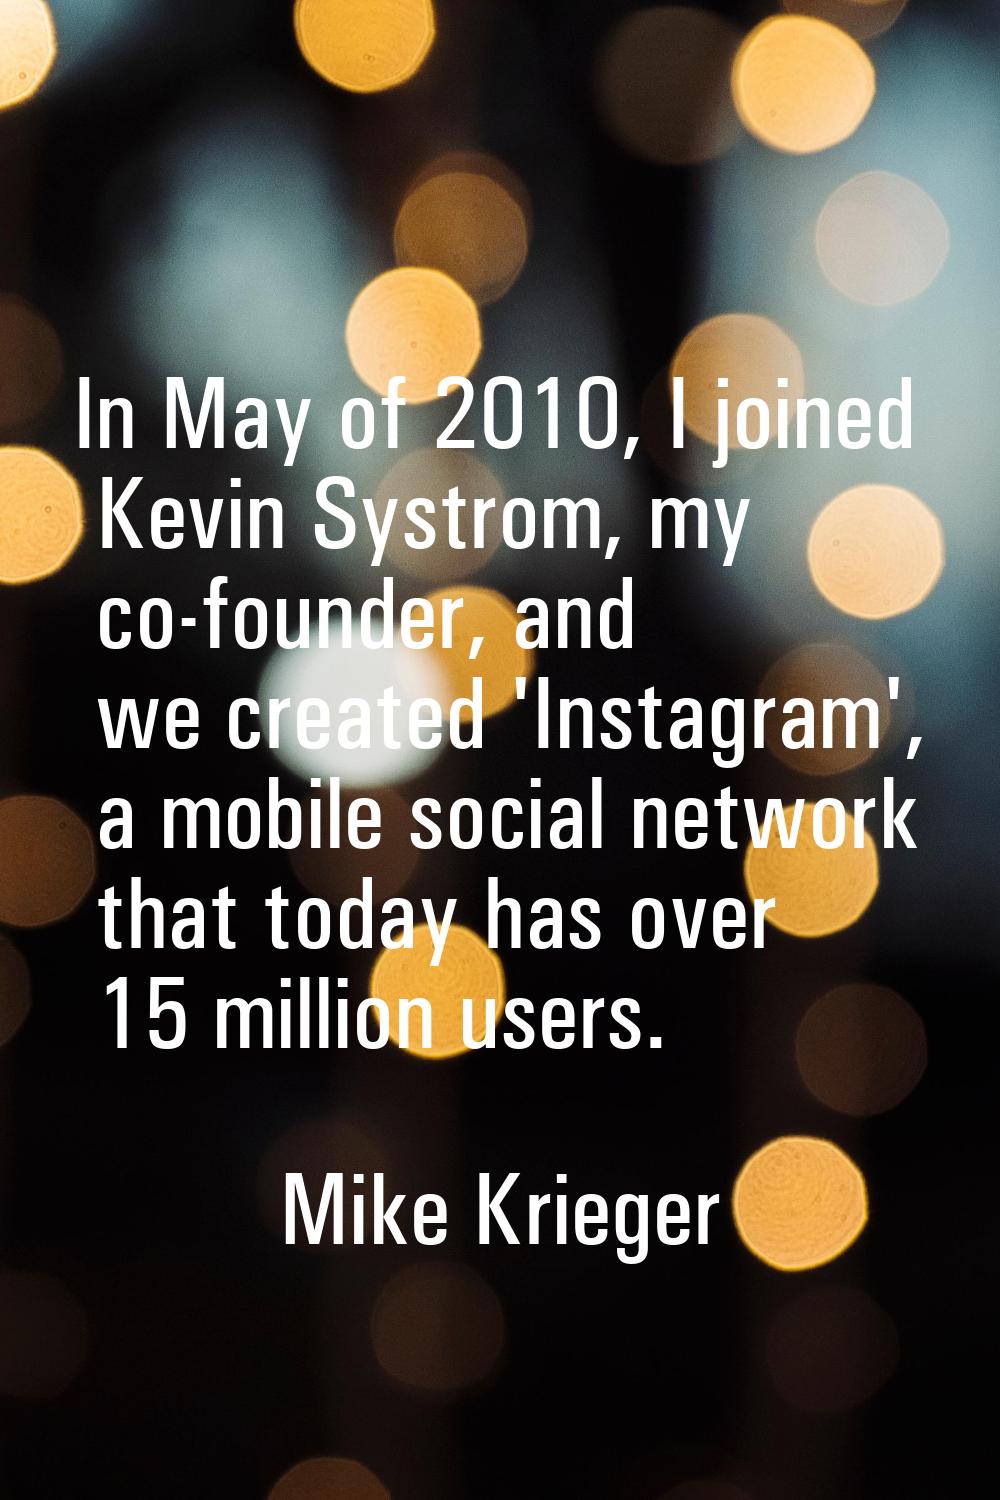 In May of 2010, I joined Kevin Systrom, my co-founder, and we created 'Instagram', a mobile social 